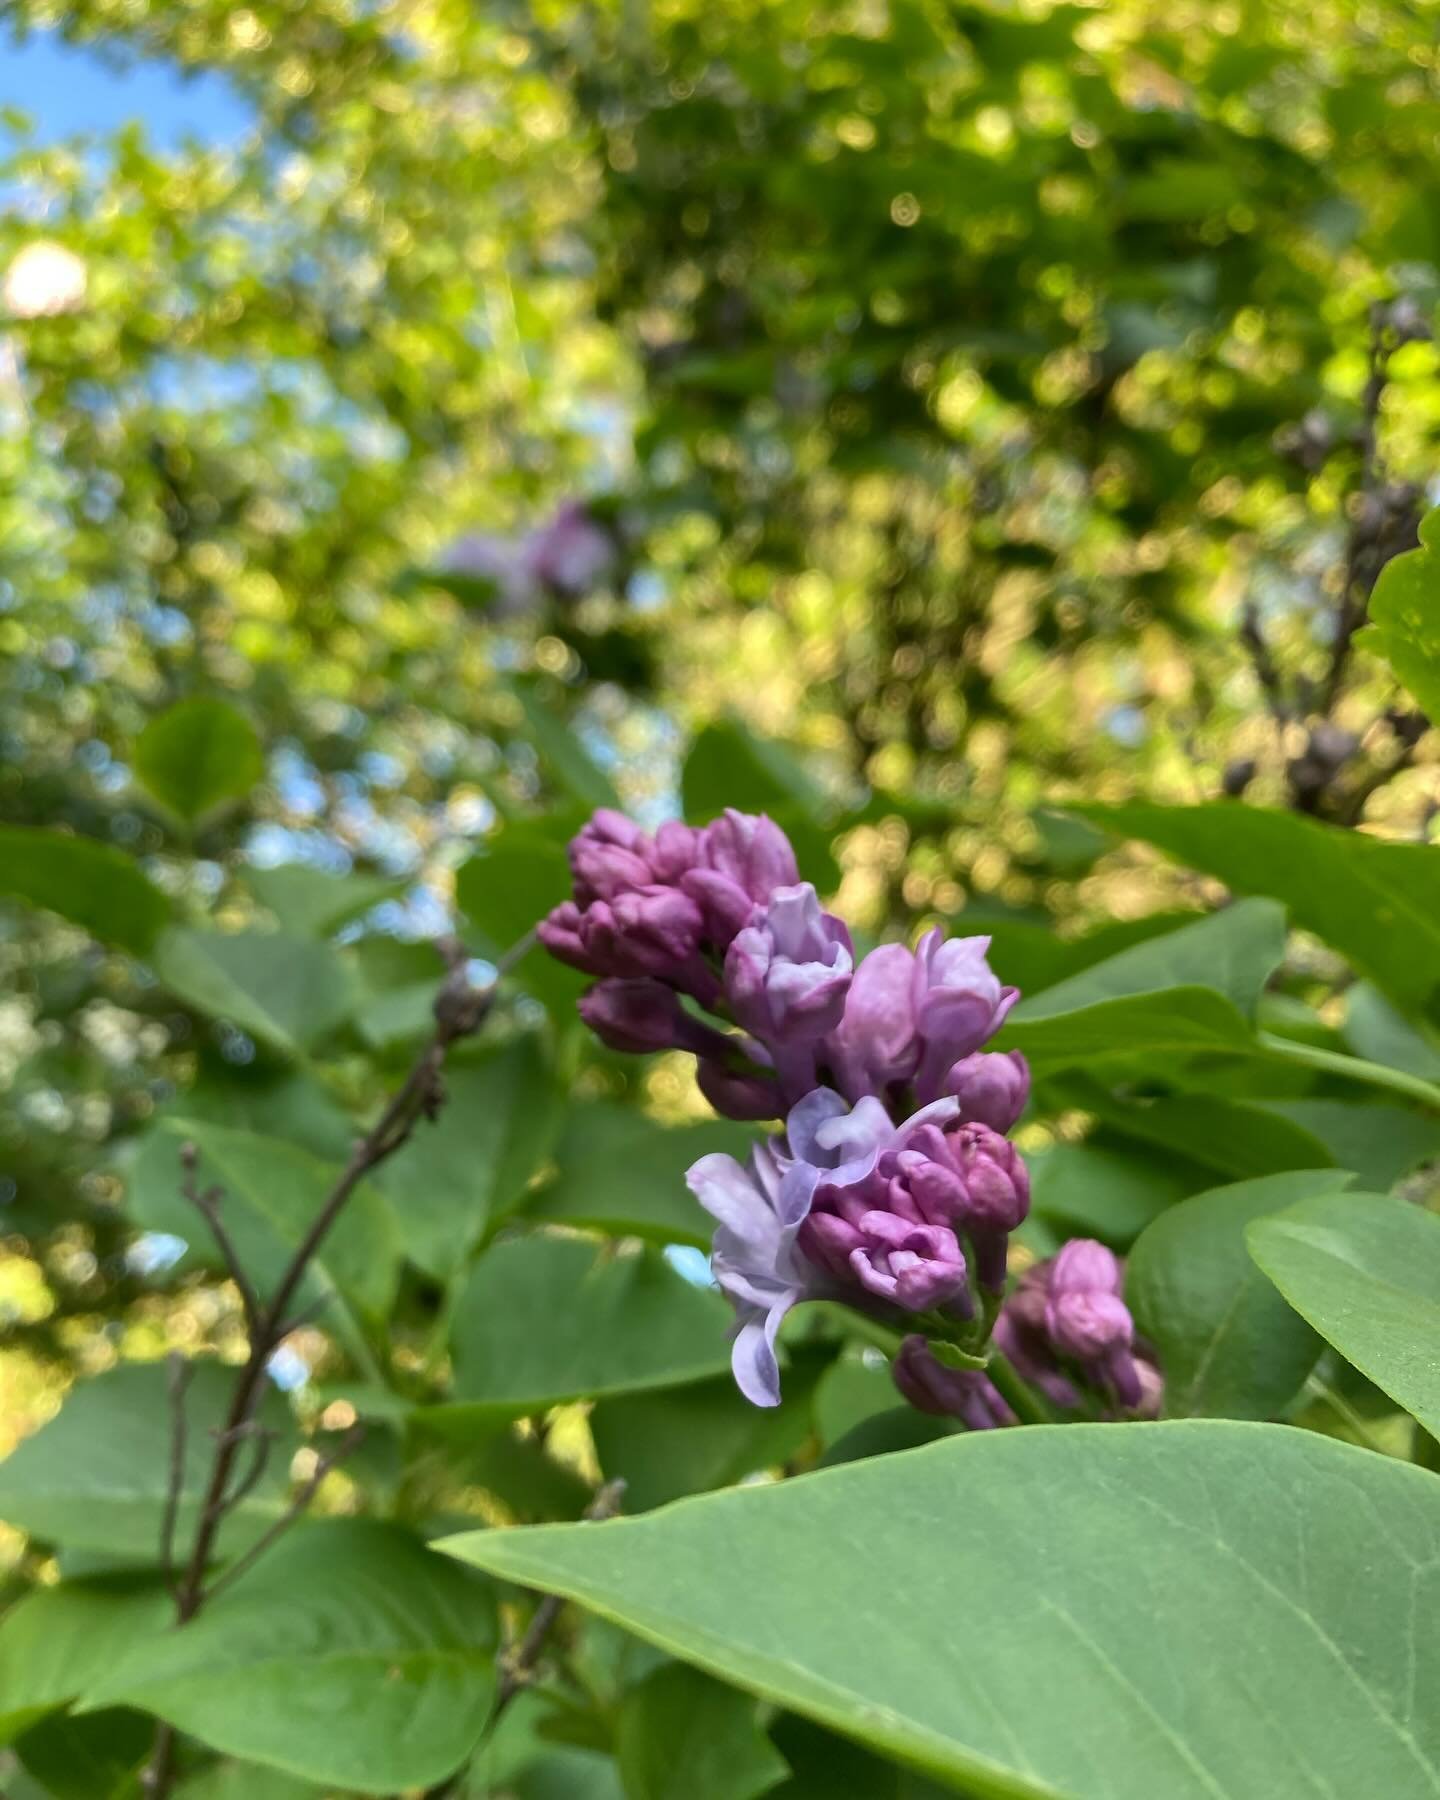 Lilacs for you! Happy Monday, friends. 🌸